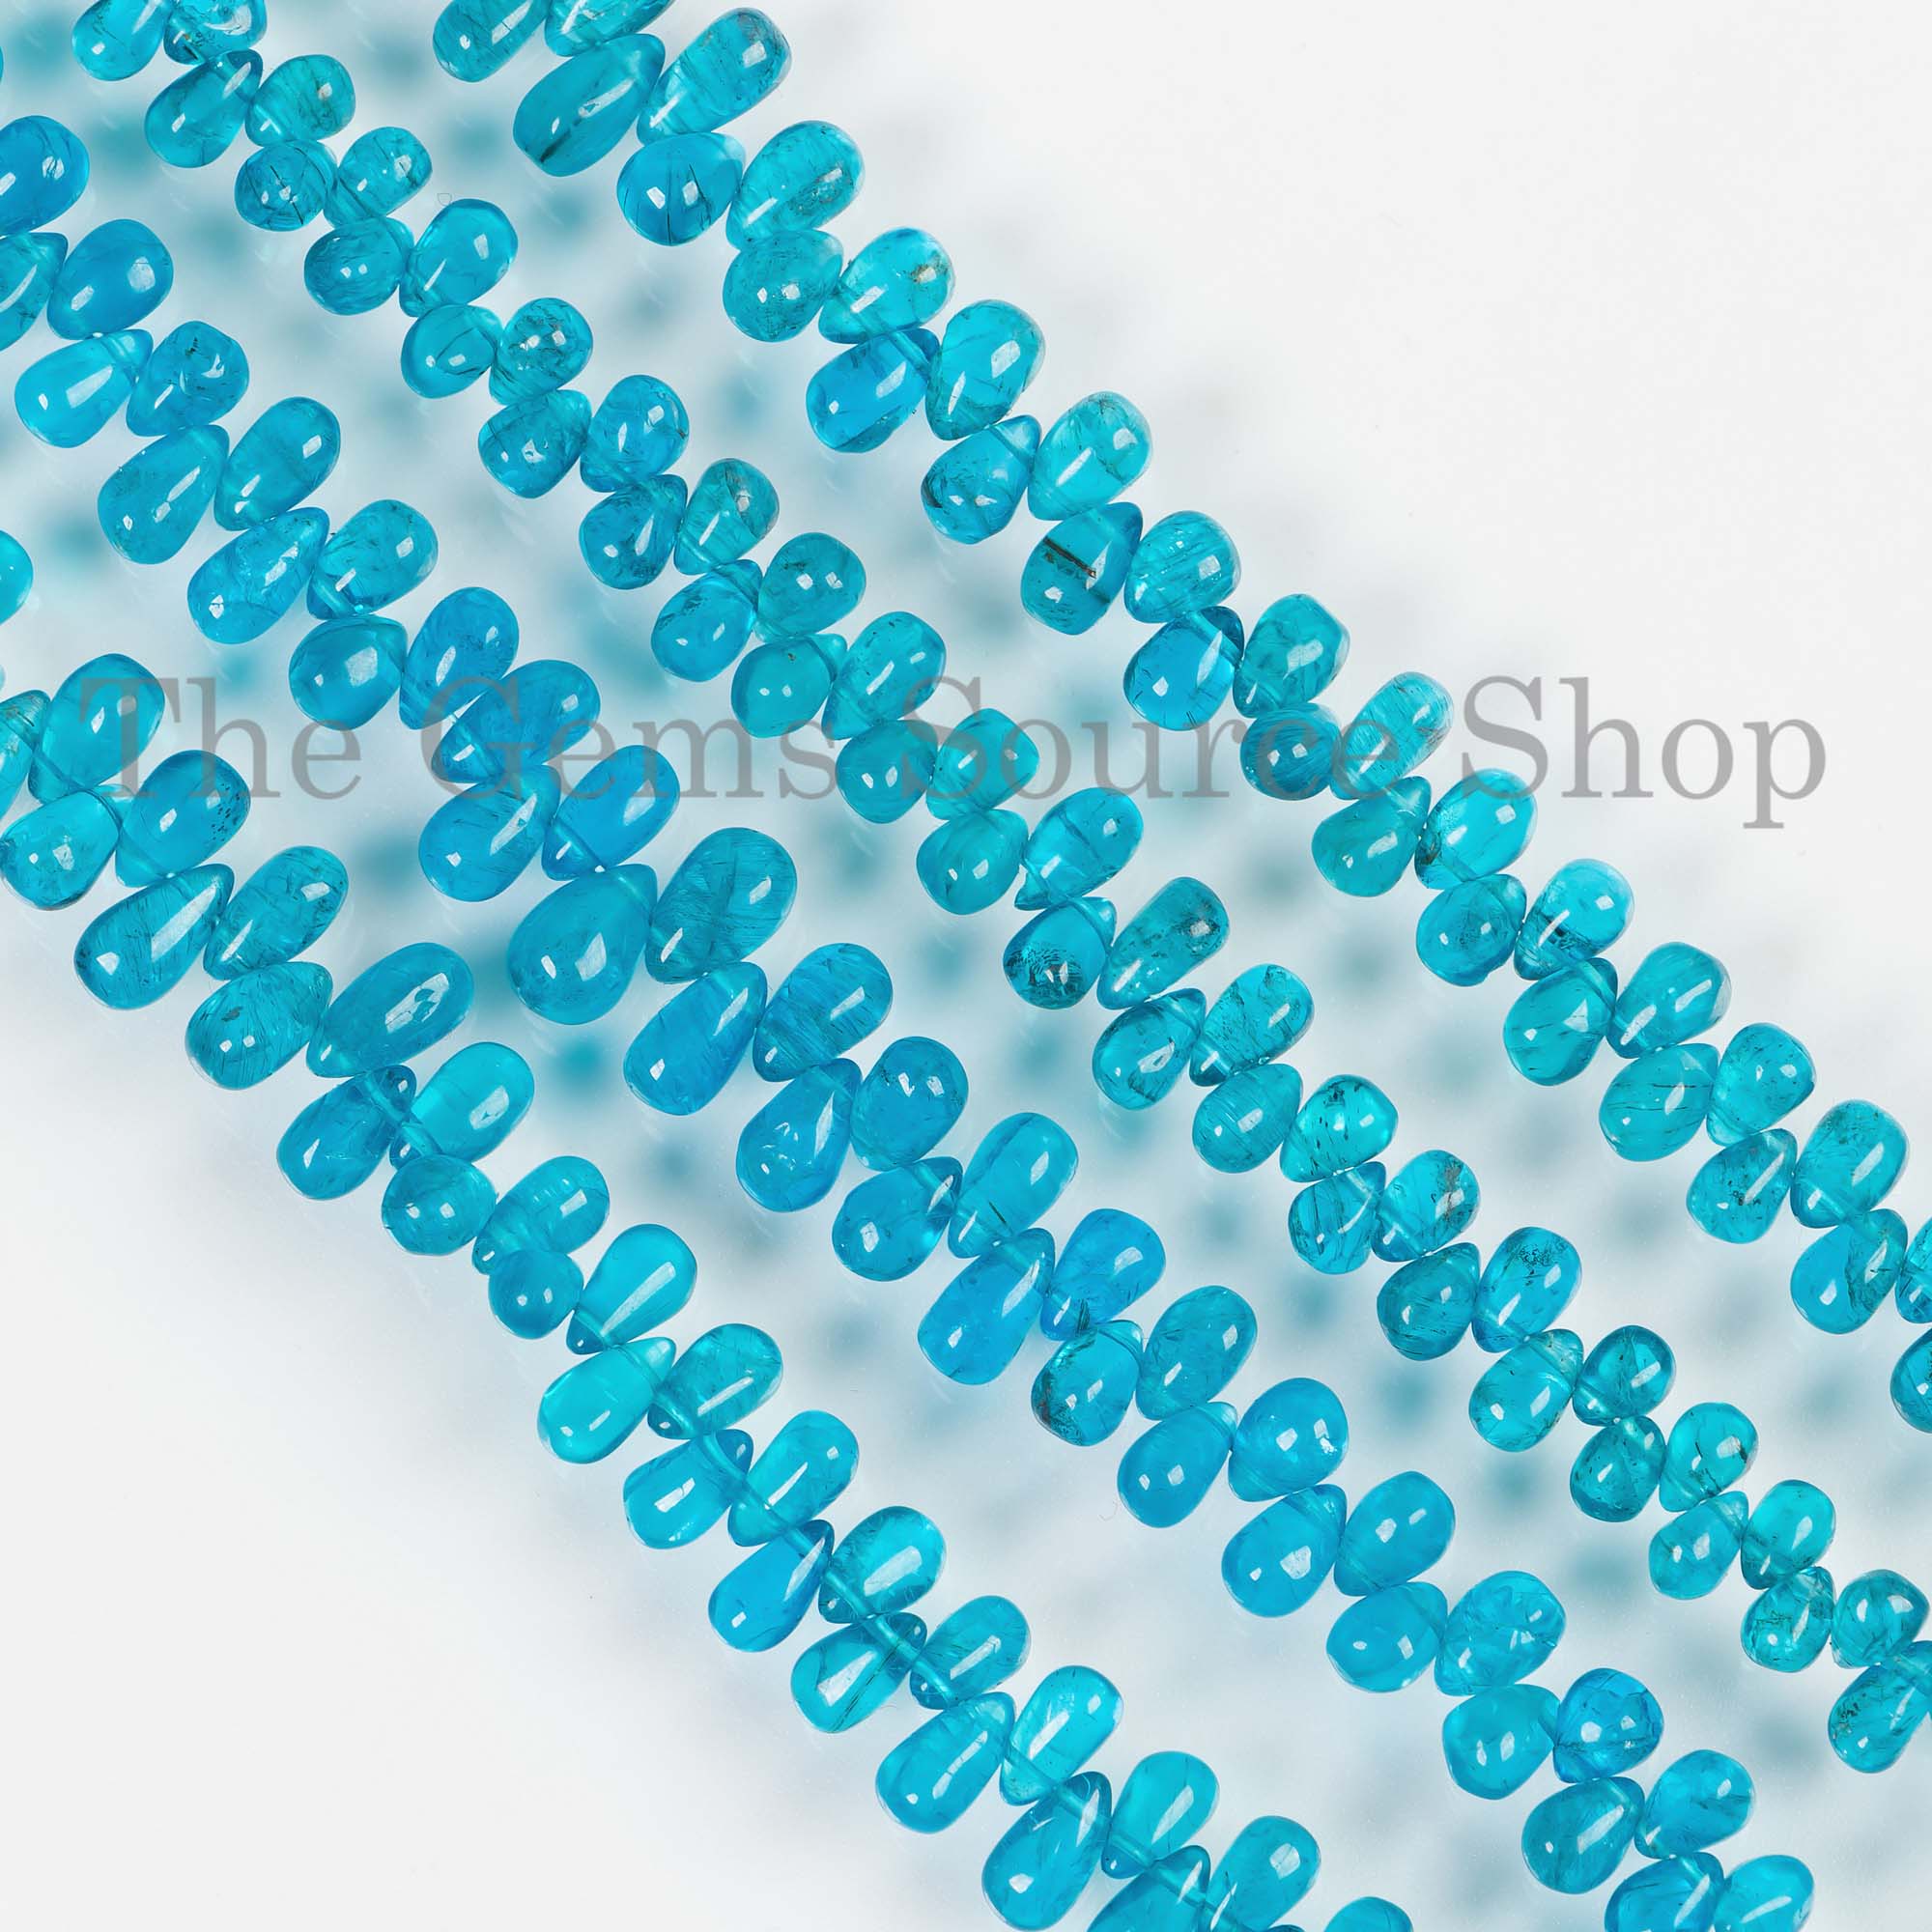 3.5x5-4x7.5mm Top Quality Neon Apatite Beads, Neon Apatite Beads, Smooth Beads, Tear Drop Briolette, Apatite Drop Beads, Gemstone Beads